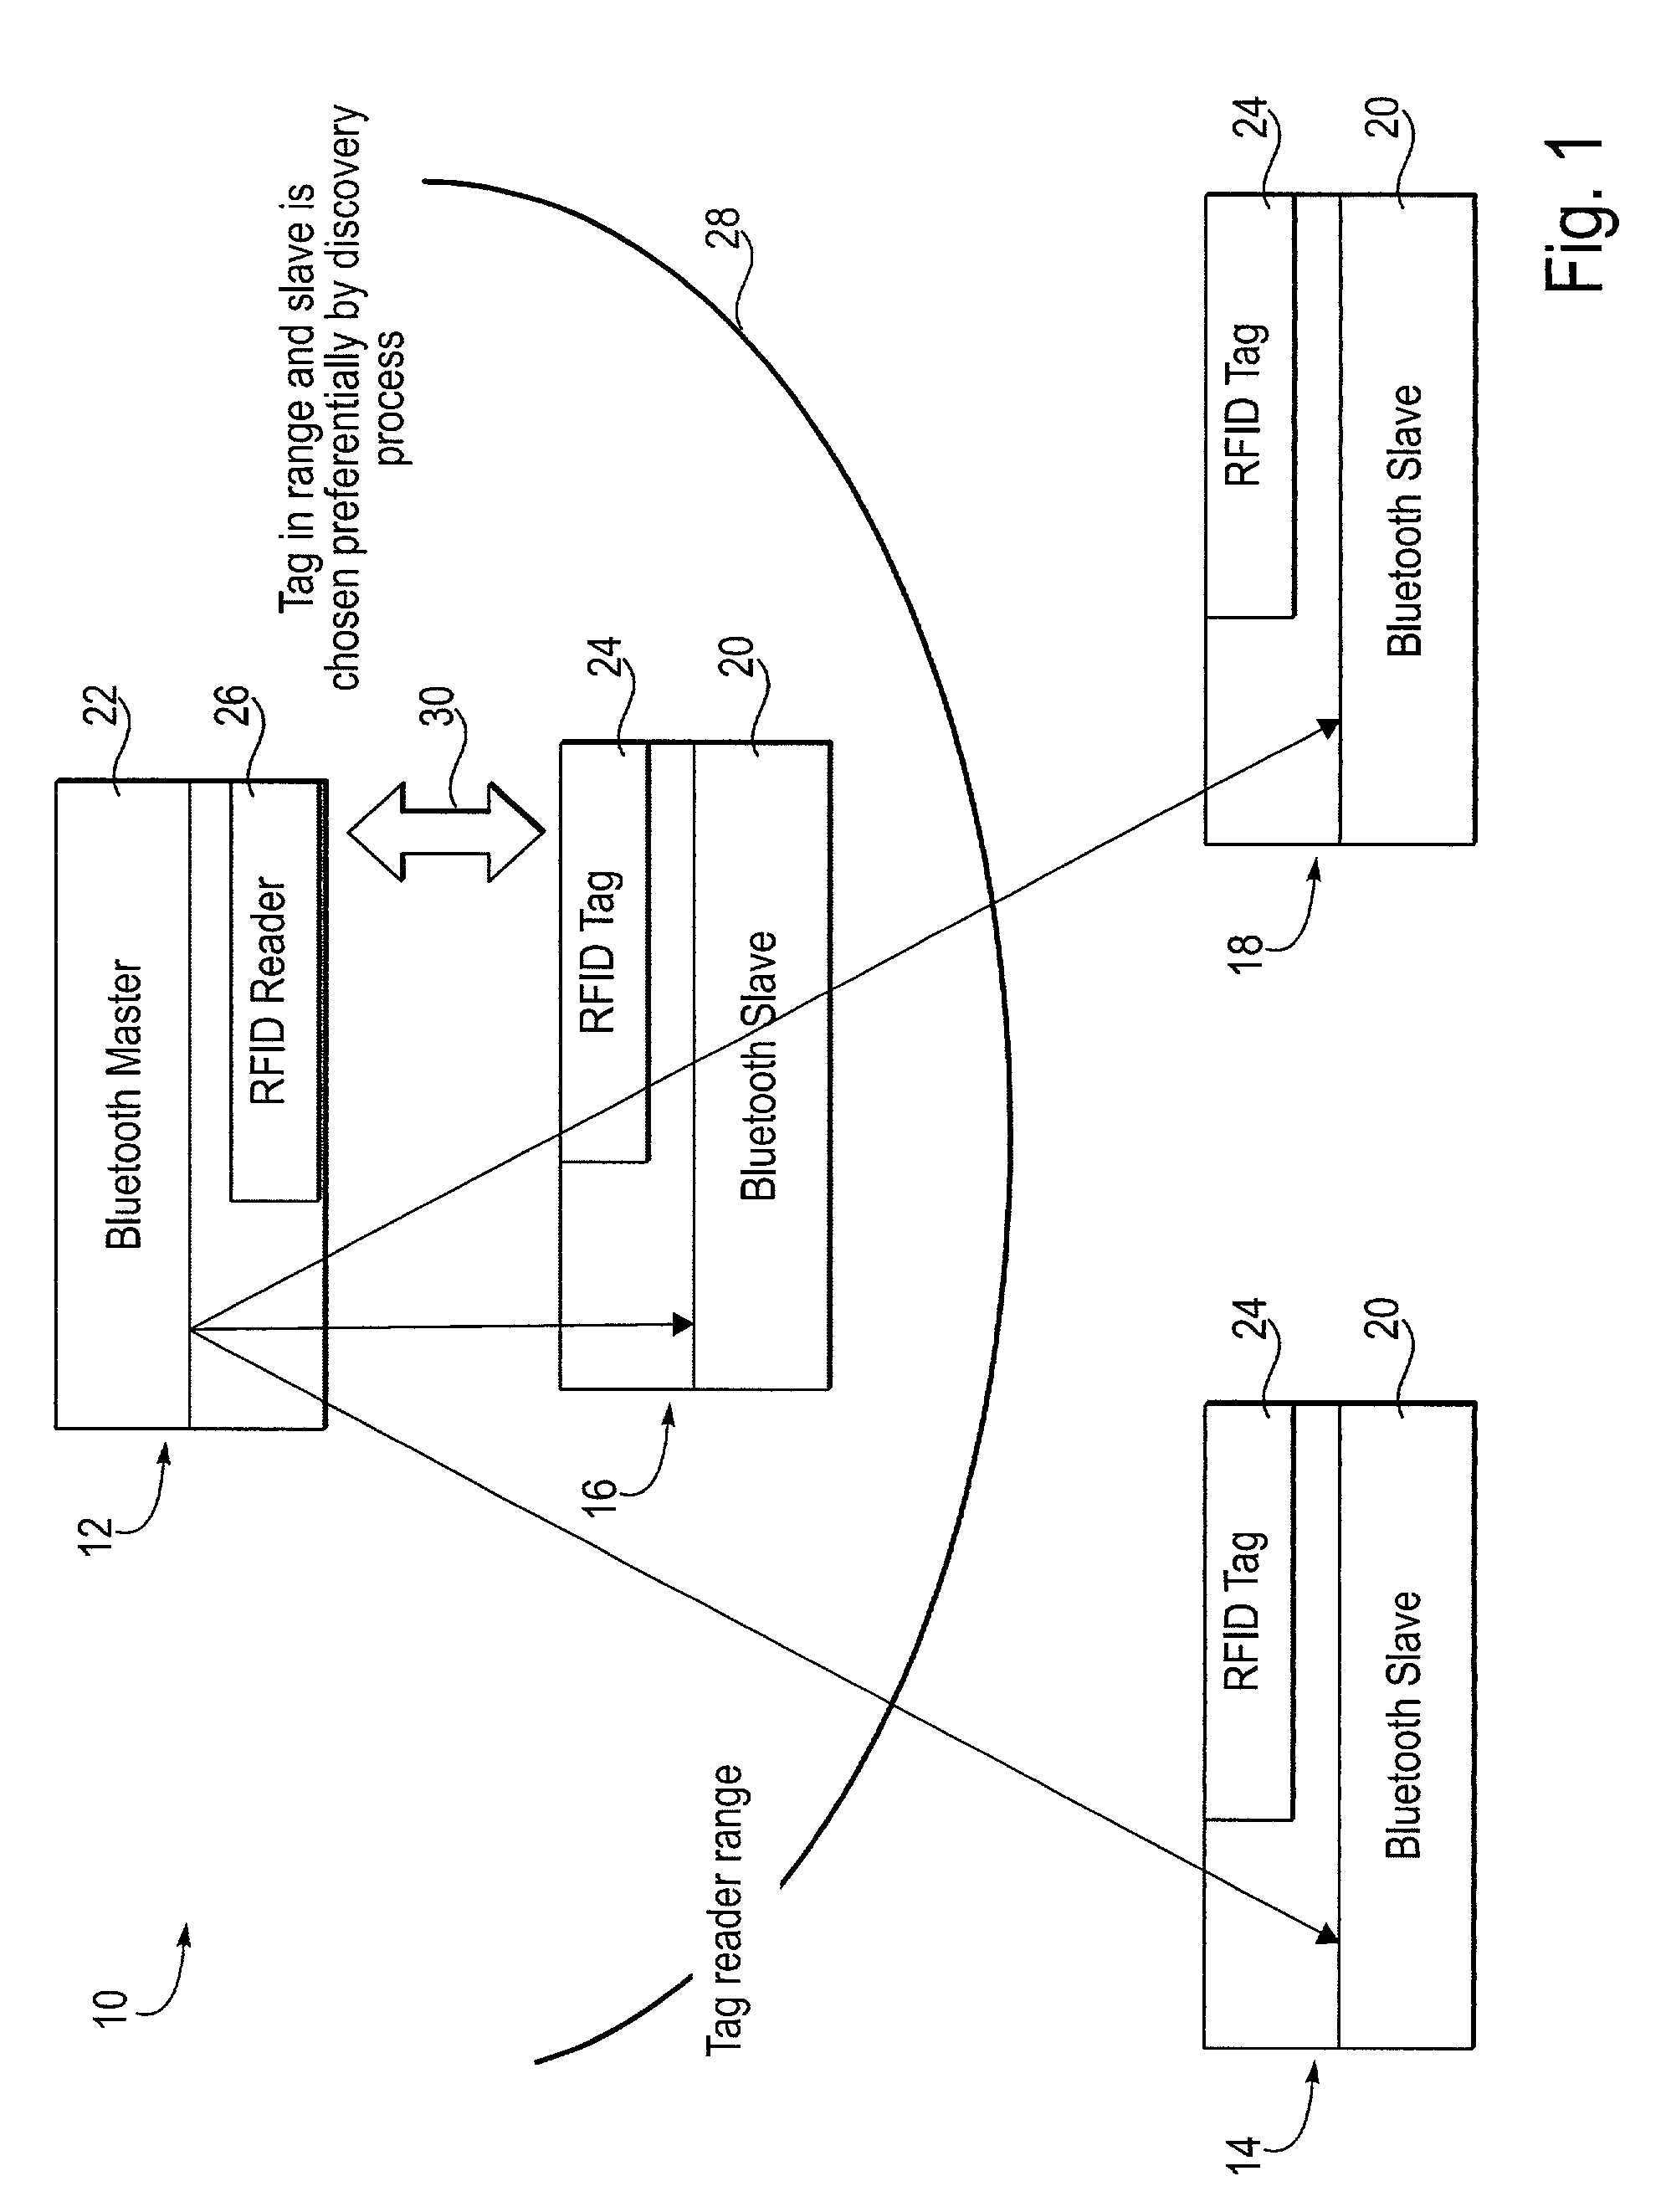 Method and system for identifying when a first device is within a physical range of a second device